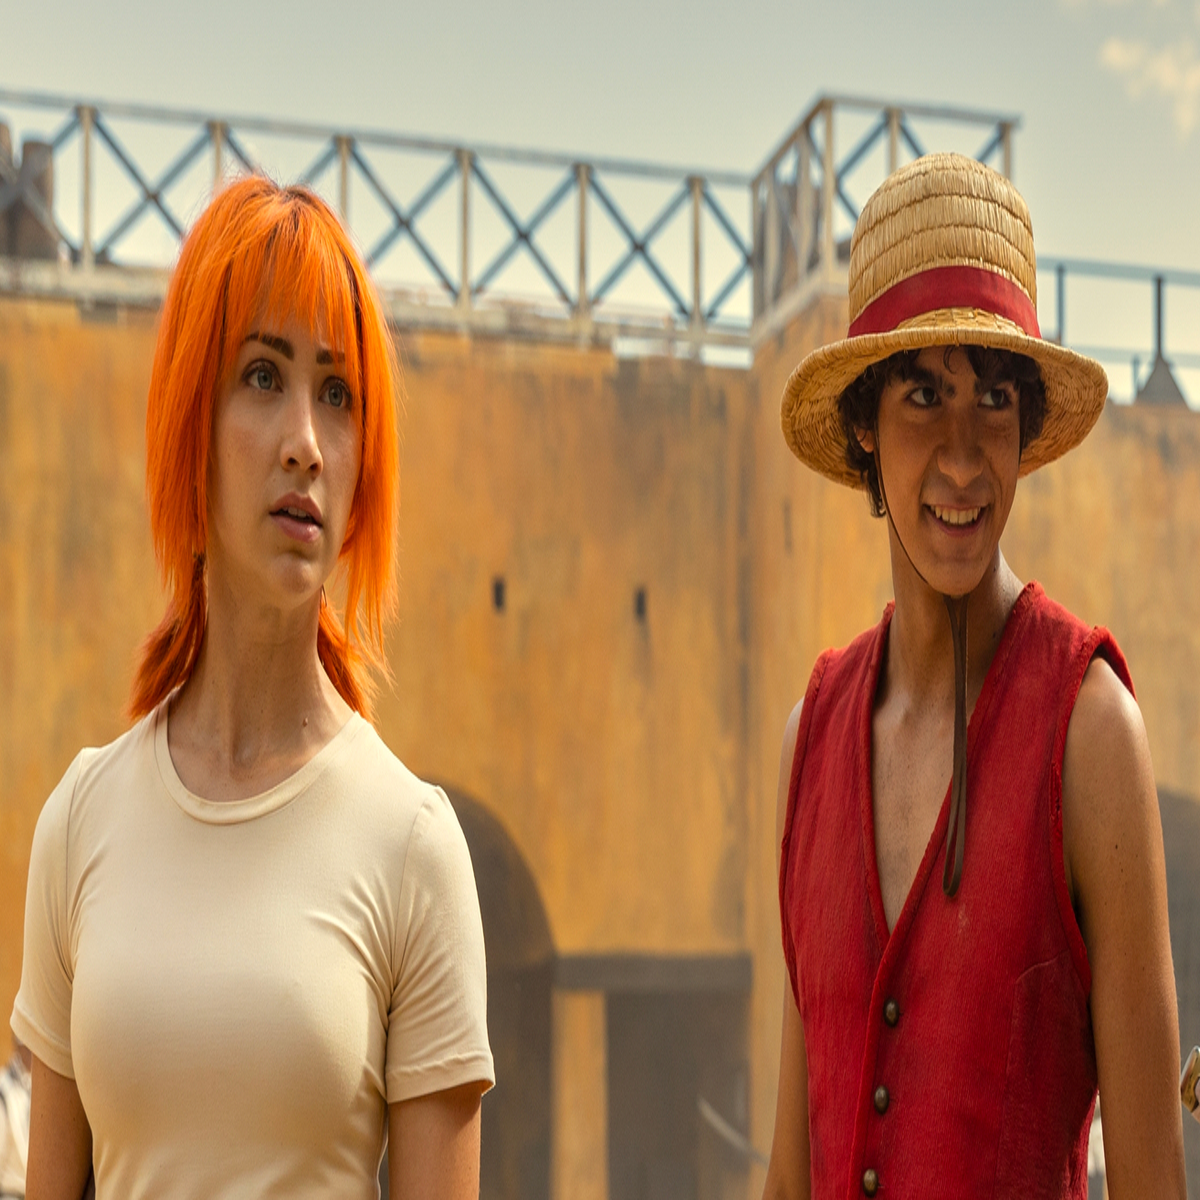 One Piece' Live Action Review, Season 1, Episode 1